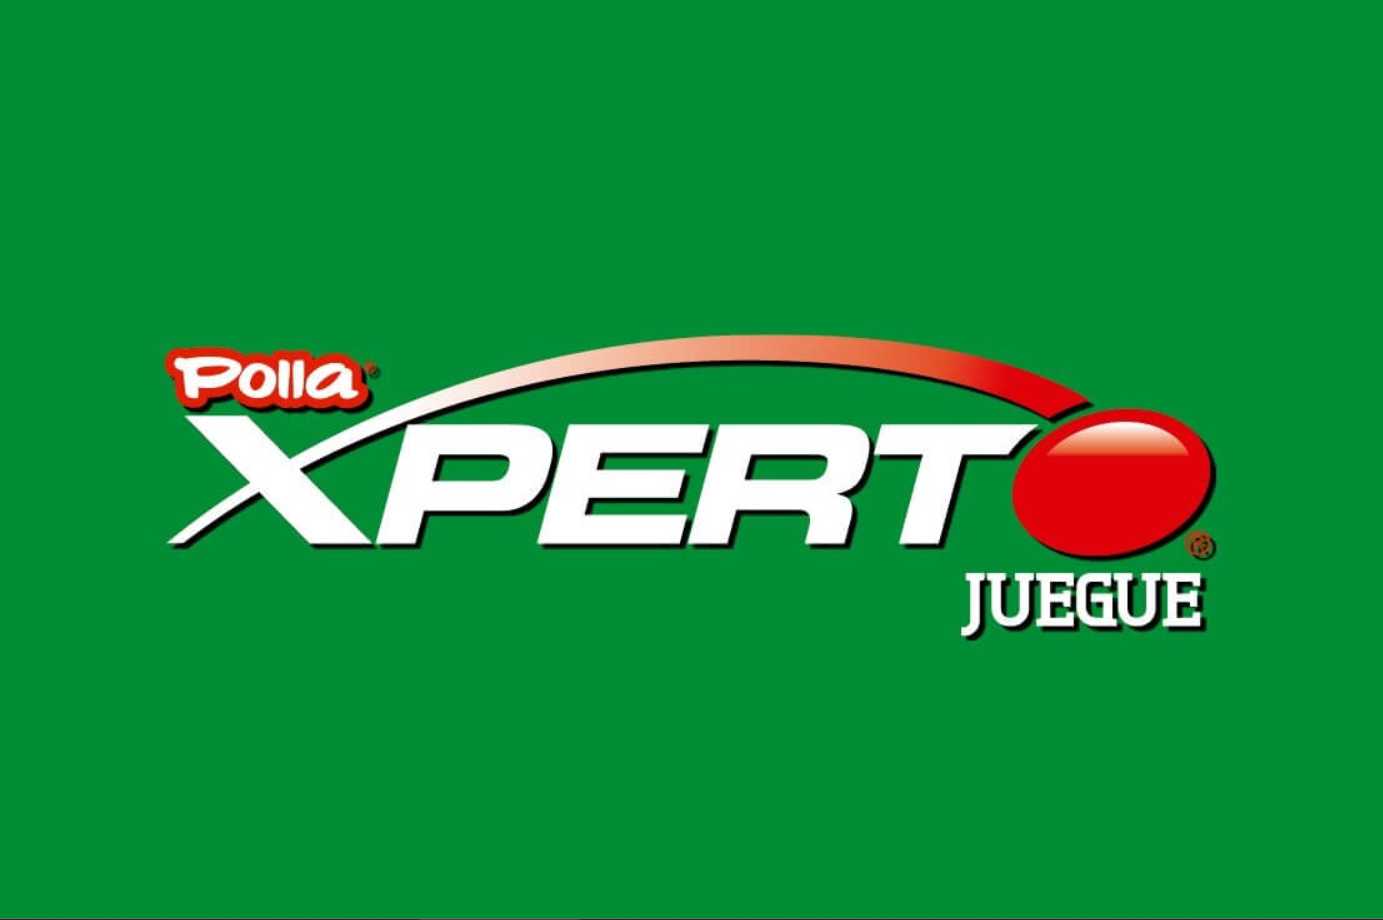 Xperto cl online